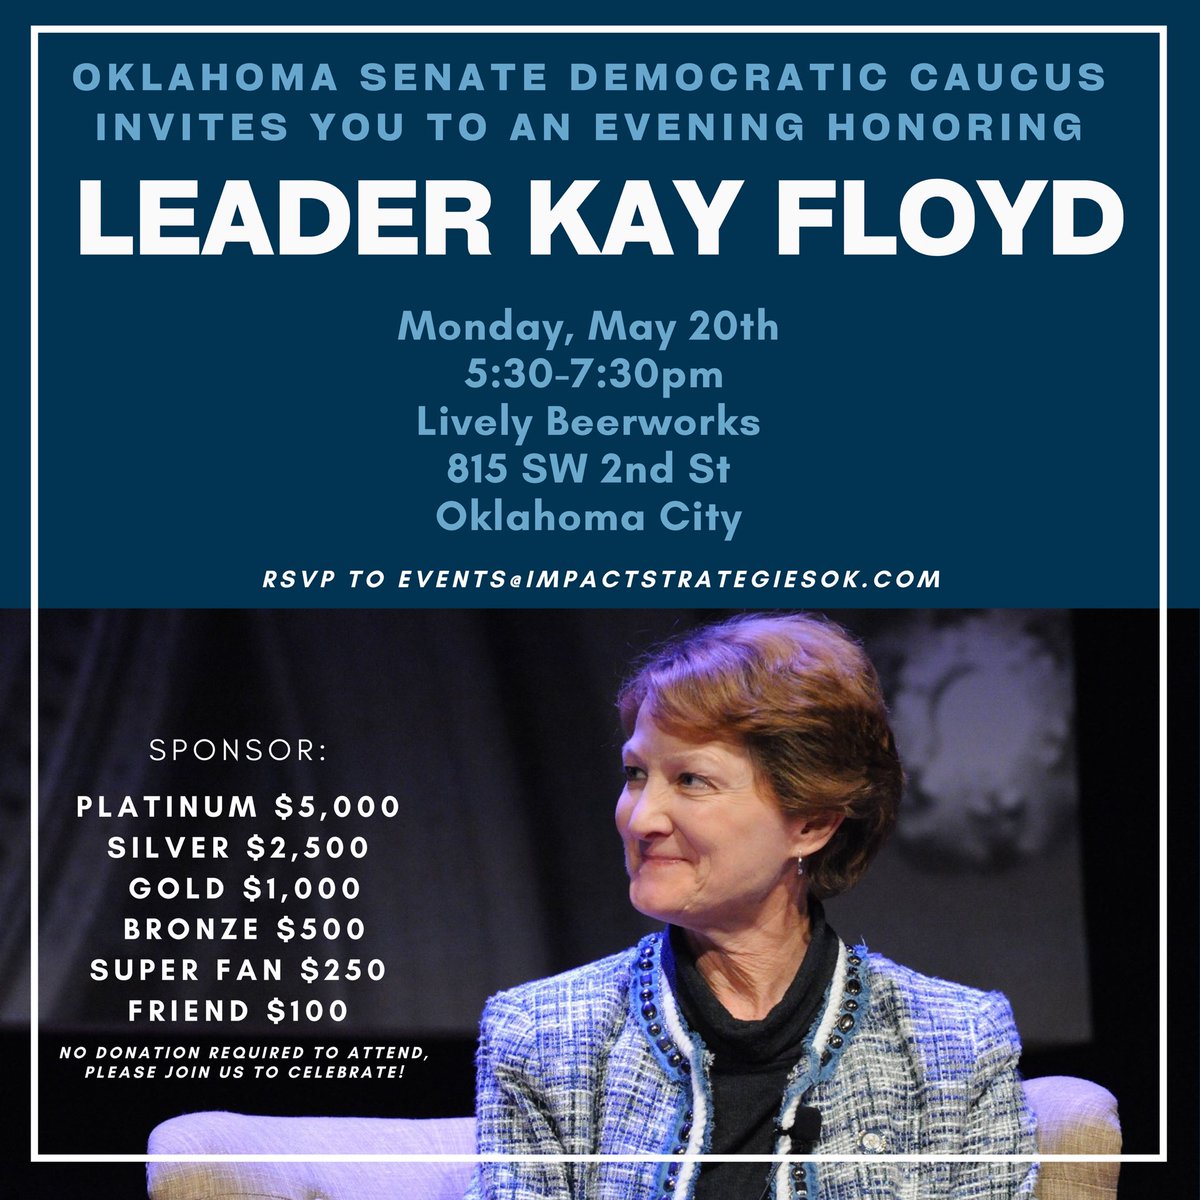 After a decade of service to Oklahoma, Leader Kay Floyd’s legislative career is coming to an end. Join us on May 20th to celebrate her legacy and impact. We look forward to Oklahomans across the state joining us for an evening of celebration.